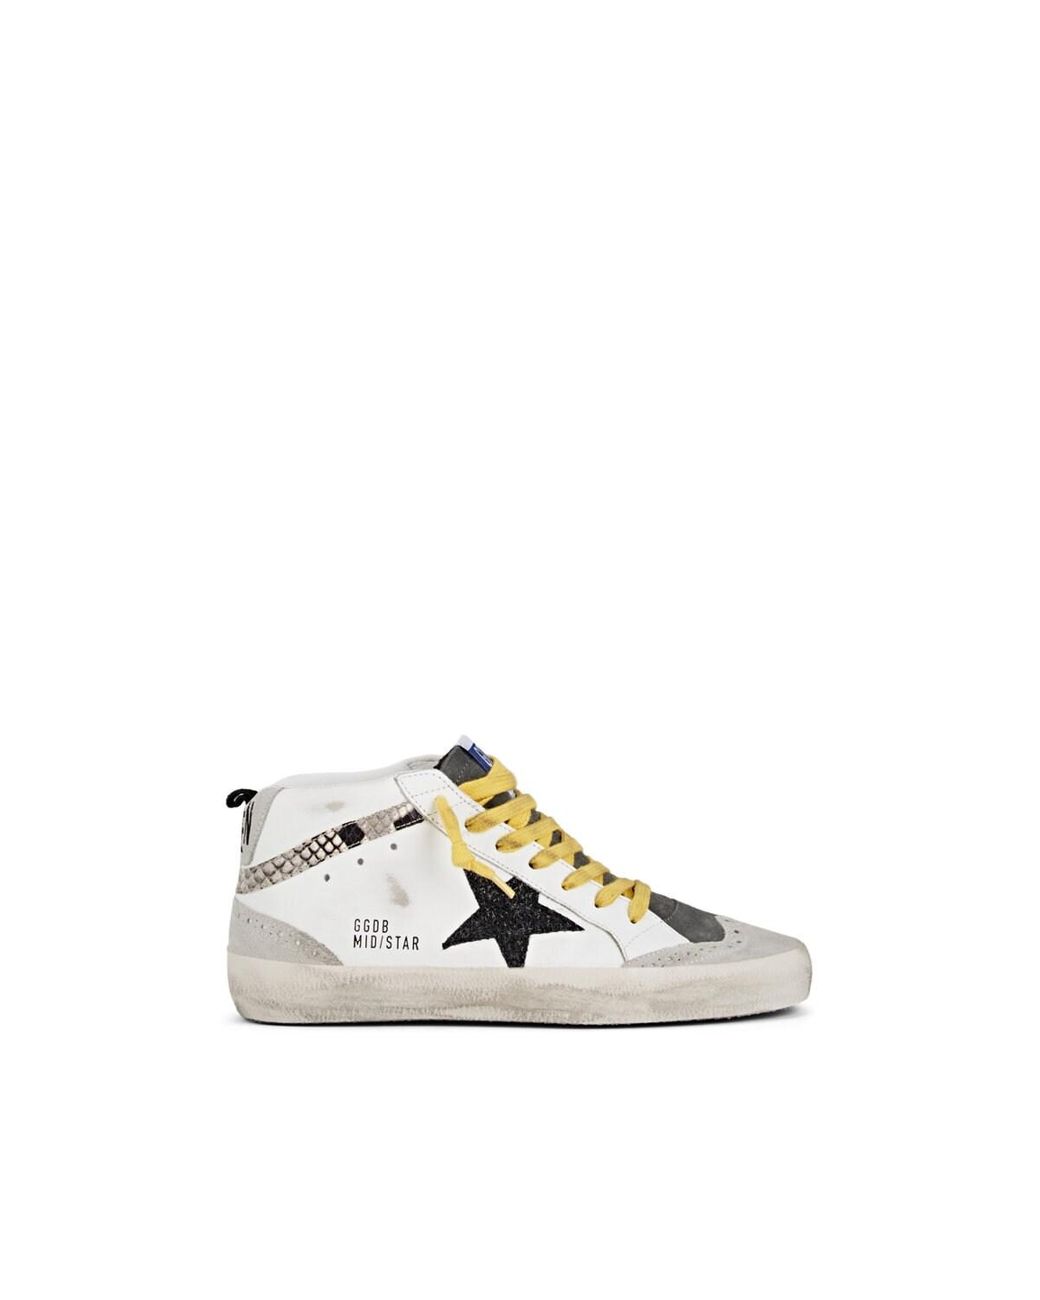 Golden Goose Deluxe Brand Mid Star Leather & Suede Sneakers in White - Lyst